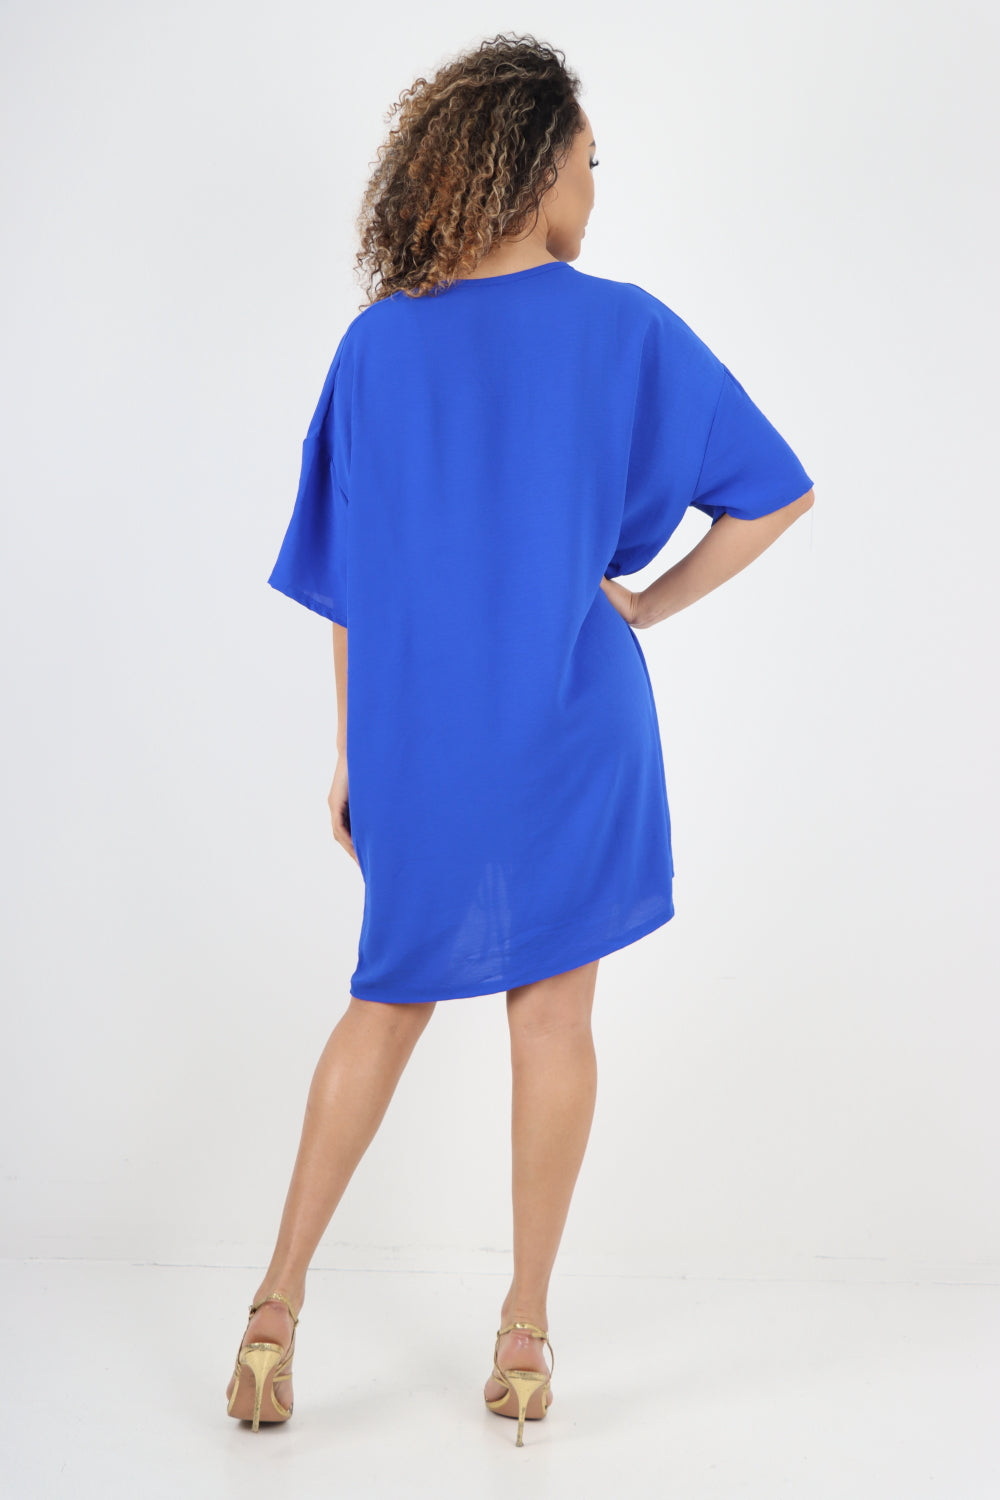 Ruched String V Neck Tunic Top